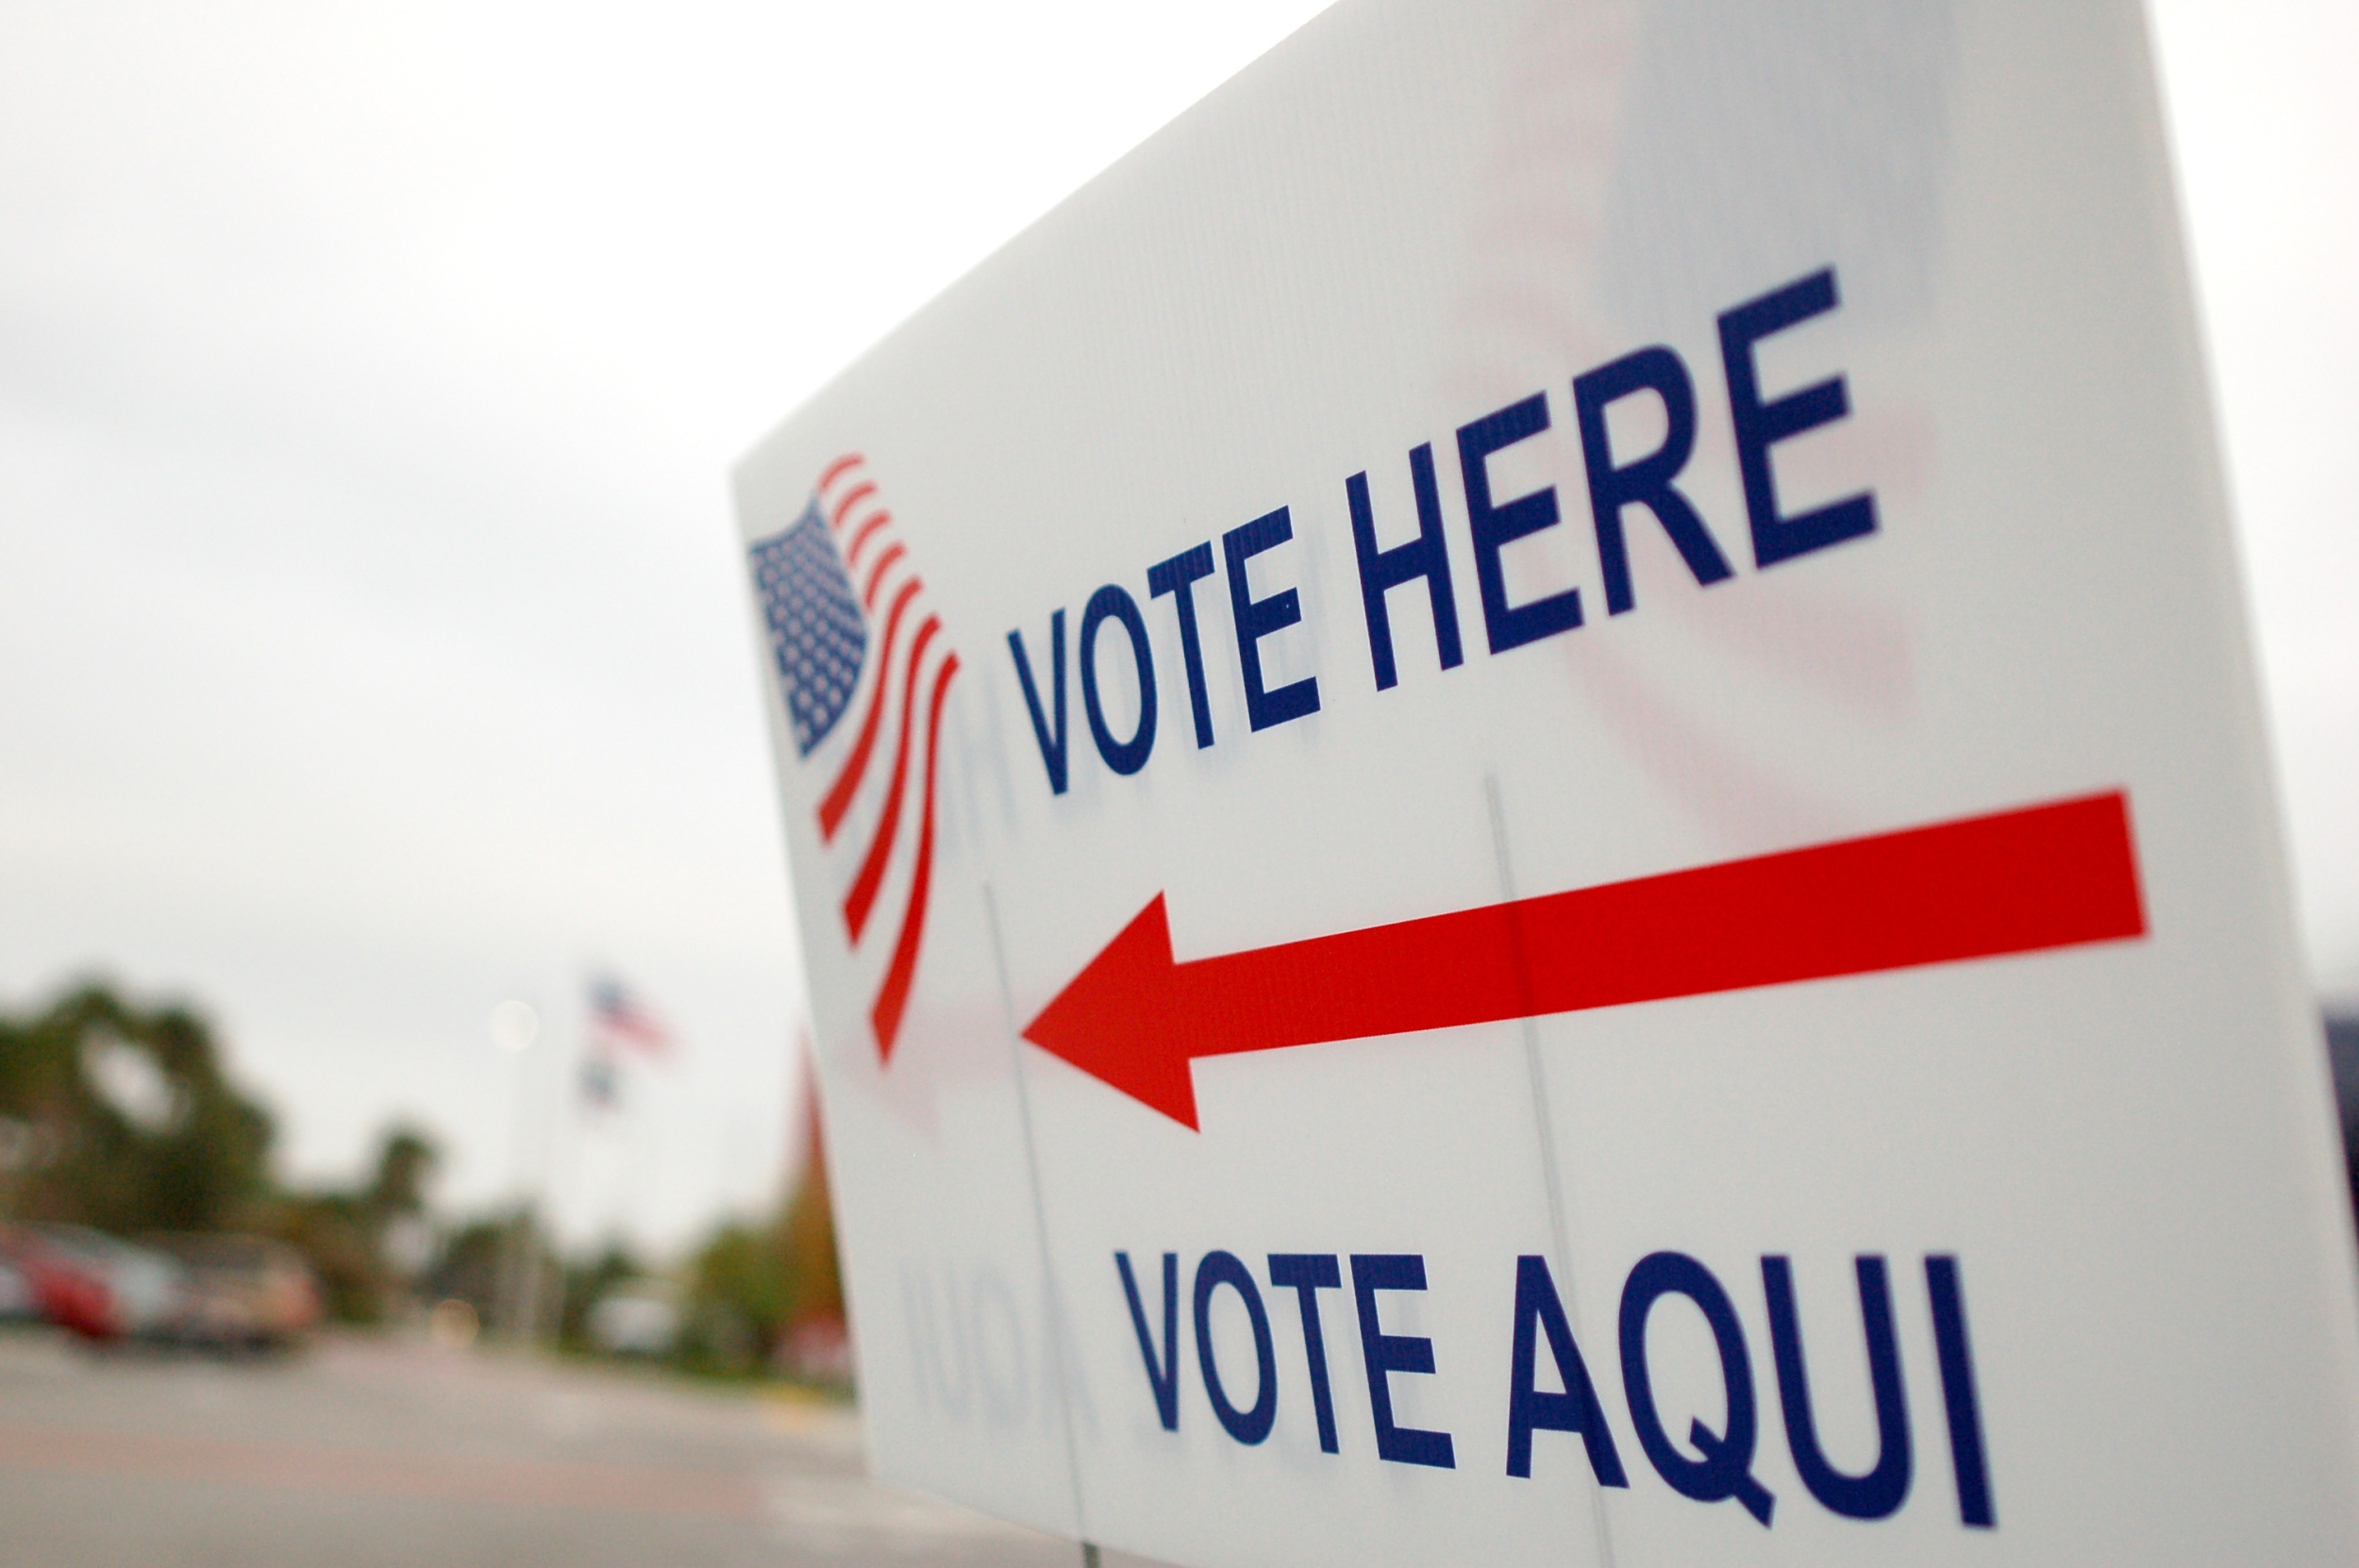 A white sign staked into the ground reads "VOTE HERE" and "VOTE AQUI" in blue letters. A red arrow printed on the sign points to the left and is stacked between the words. An American flag is also printed on the sign. A parking lot is visible on the far left of the image in the background.